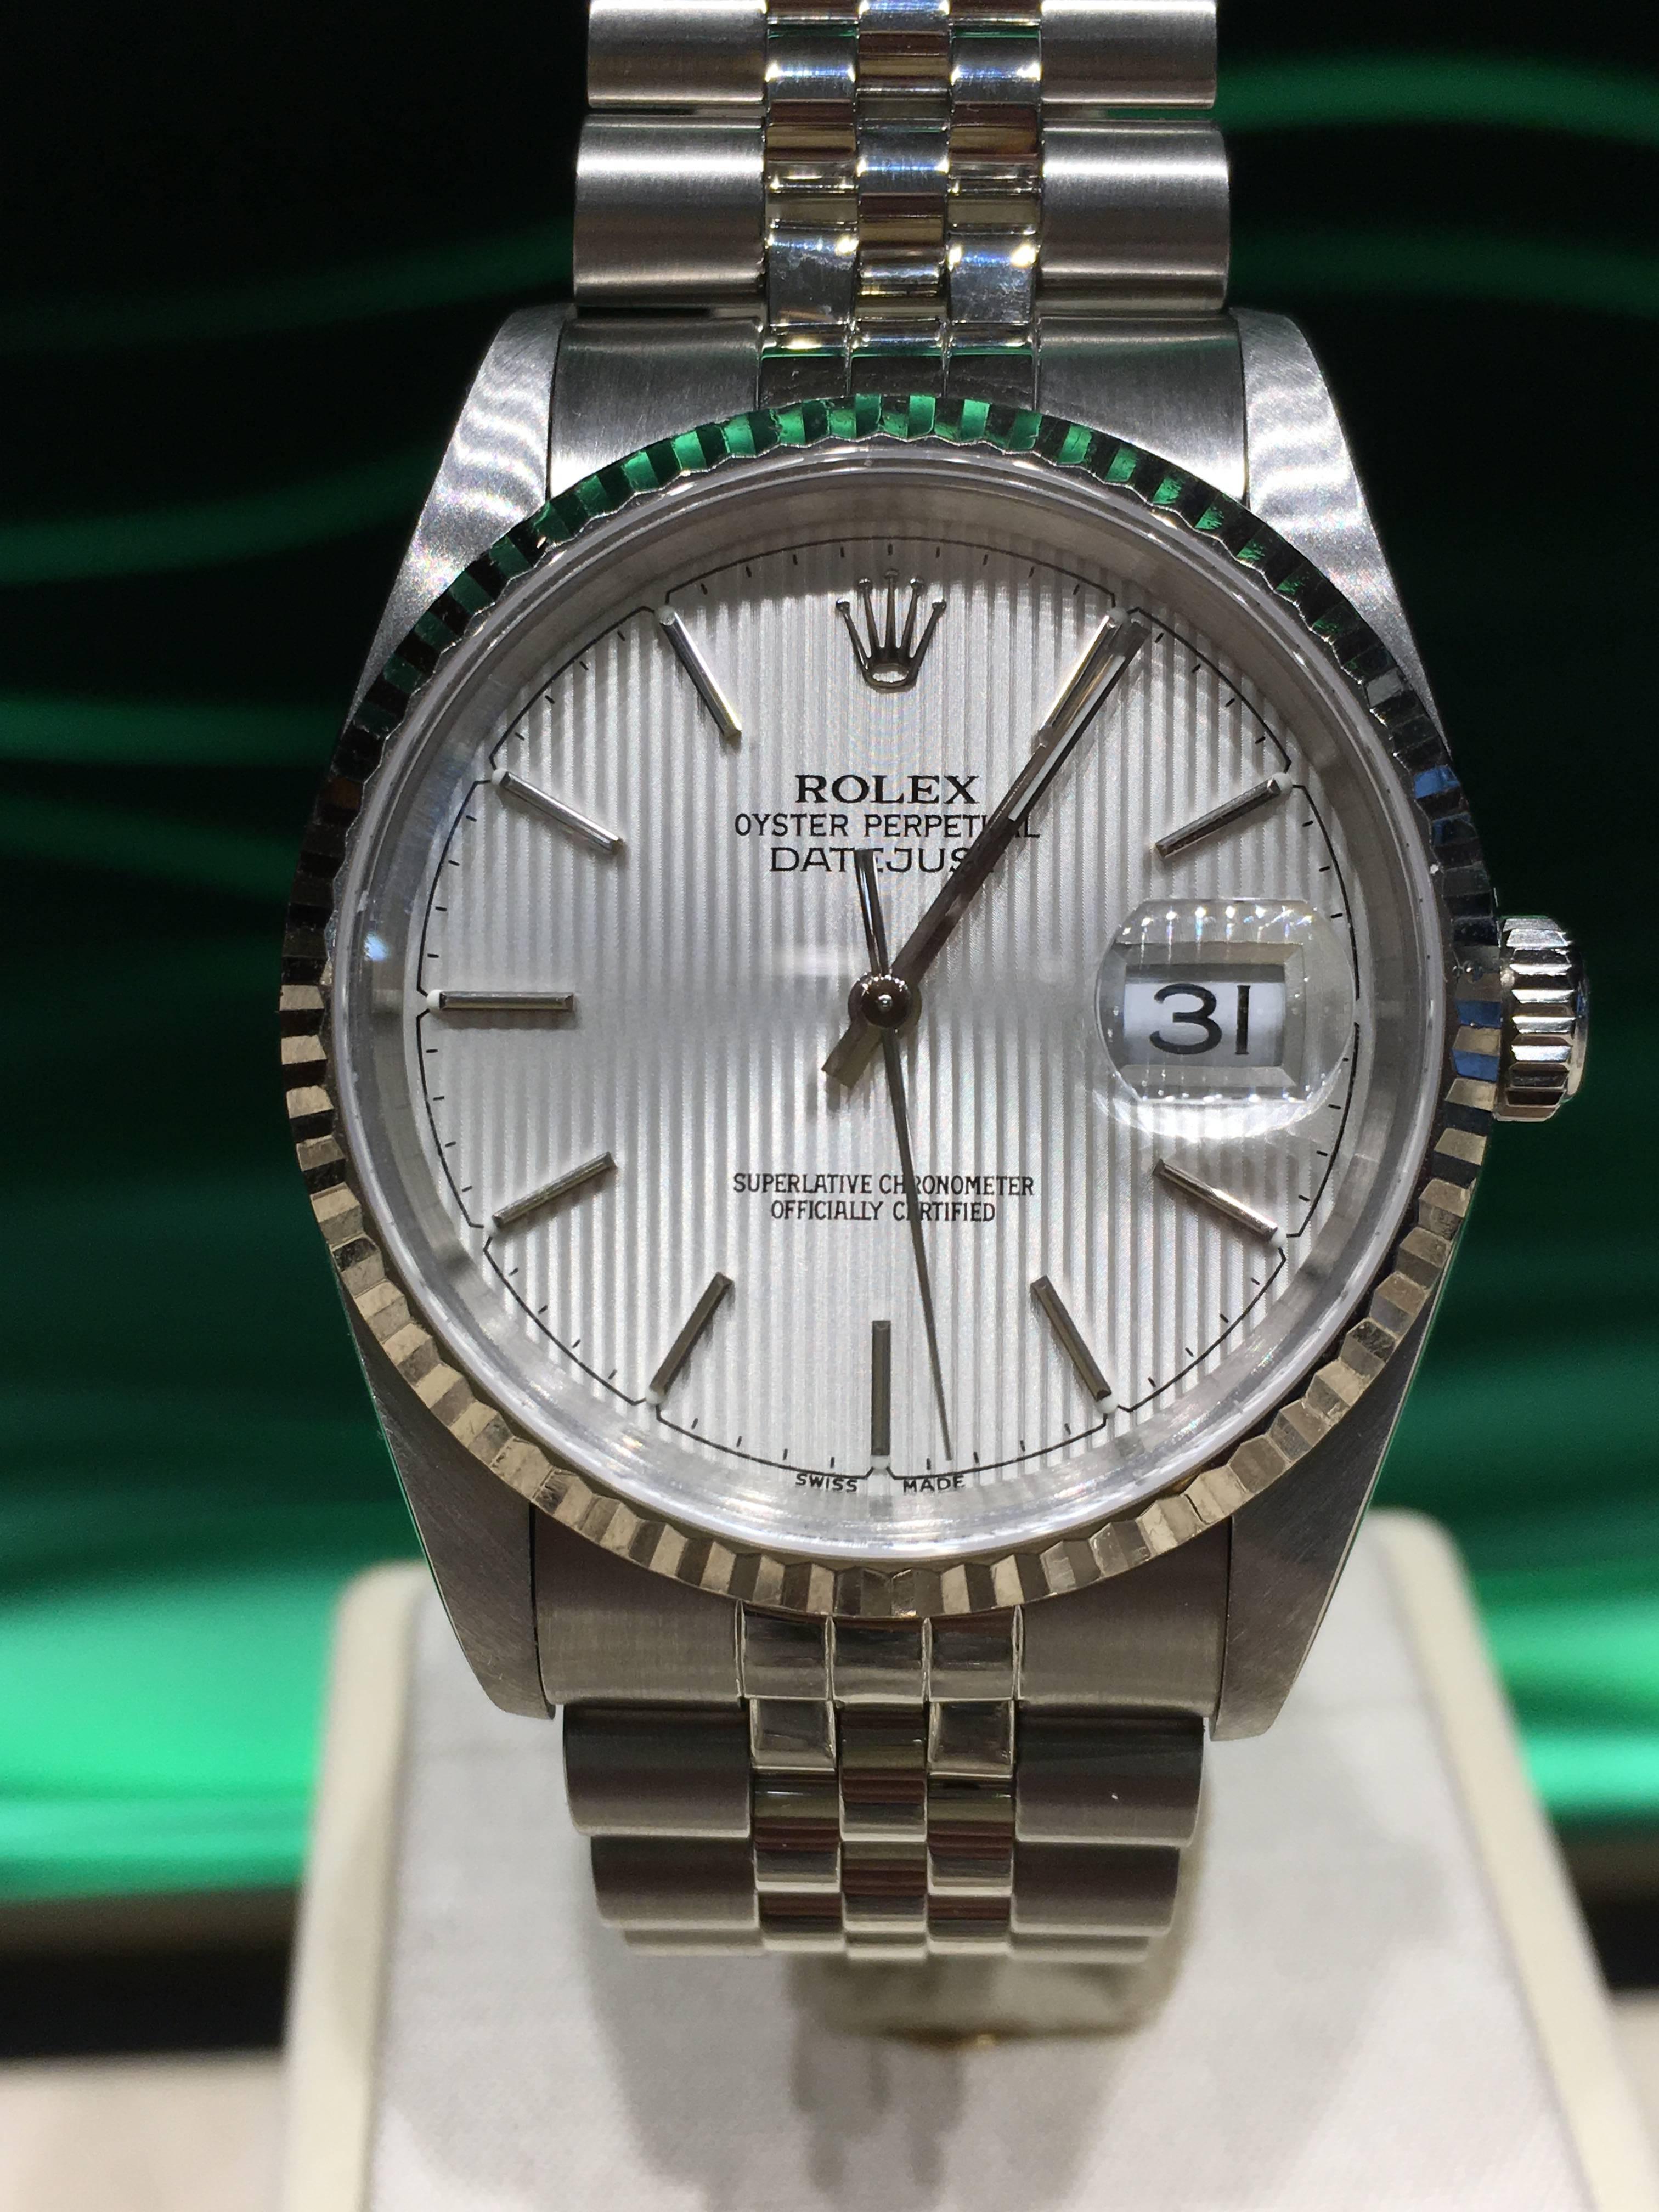 Rolex Oyster Perpetual Date just automatic winding timepiece, 31 jewels, quick set with sapphire crystal. Stainless steel case 36mm diameter. fluted bezel, stainless steel jubilee bracelet, silvered tapestry dial with stick markers. Model # 16234,